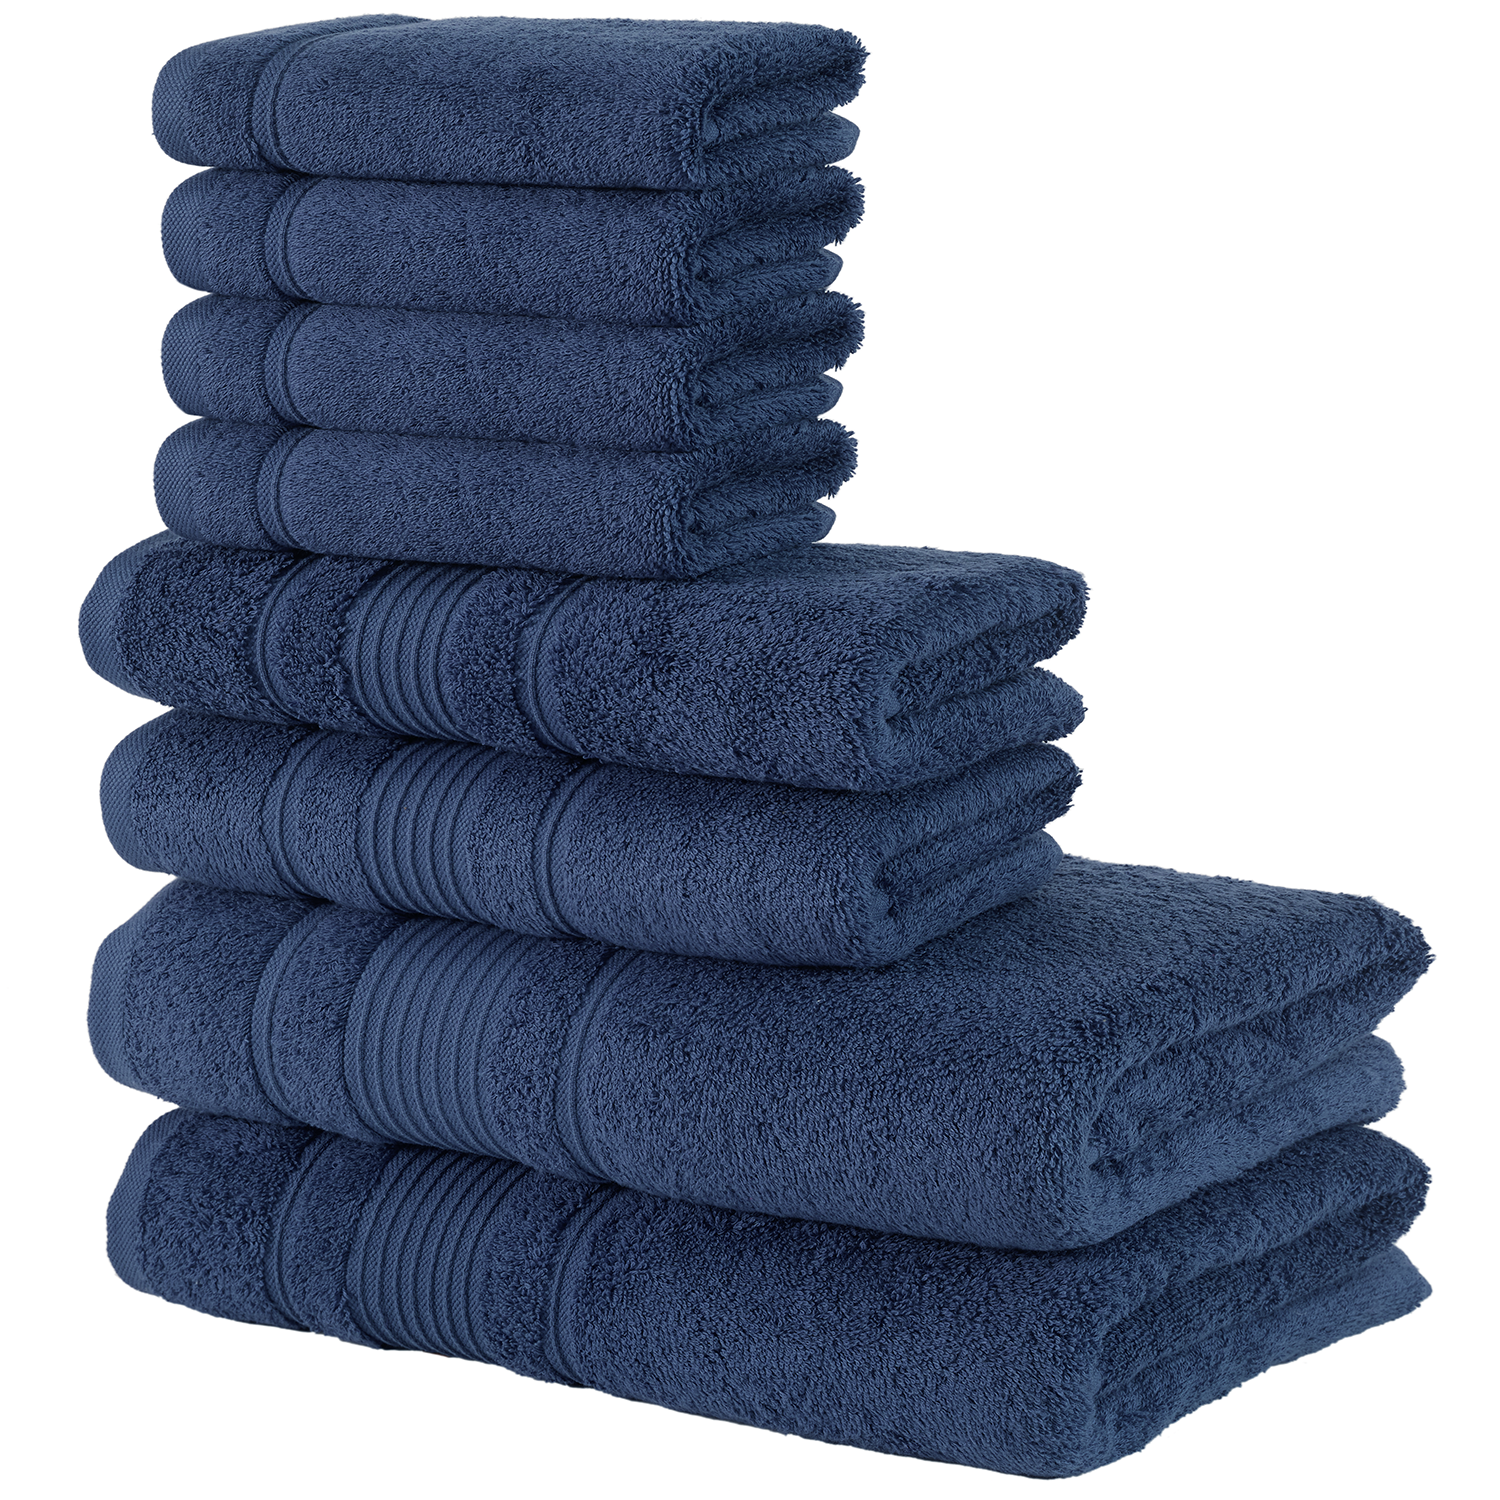 Qute Home Spa & Hotel Towels 8 Piece Towel Set, 2 Bath Towels, 2 Hand Towels, and 4 Washcloths - Navy Blue - image 2 of 3